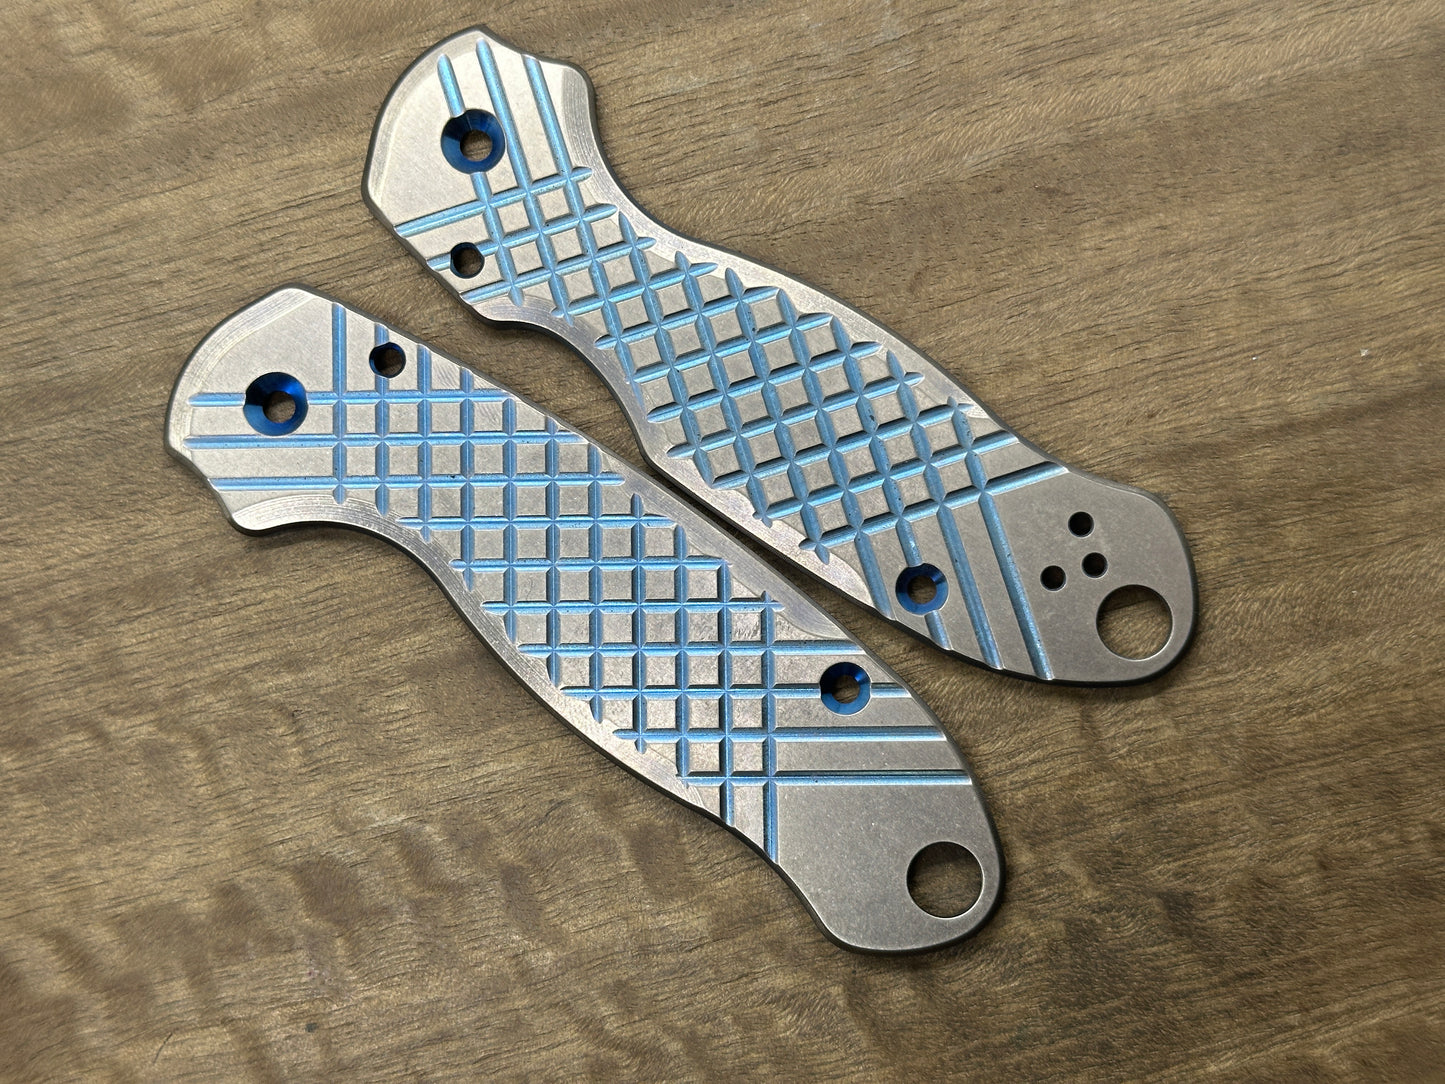 2-Tone BLUE ano Tumbled FRAG cnc milled Titanium scales for Spyderco Para 3